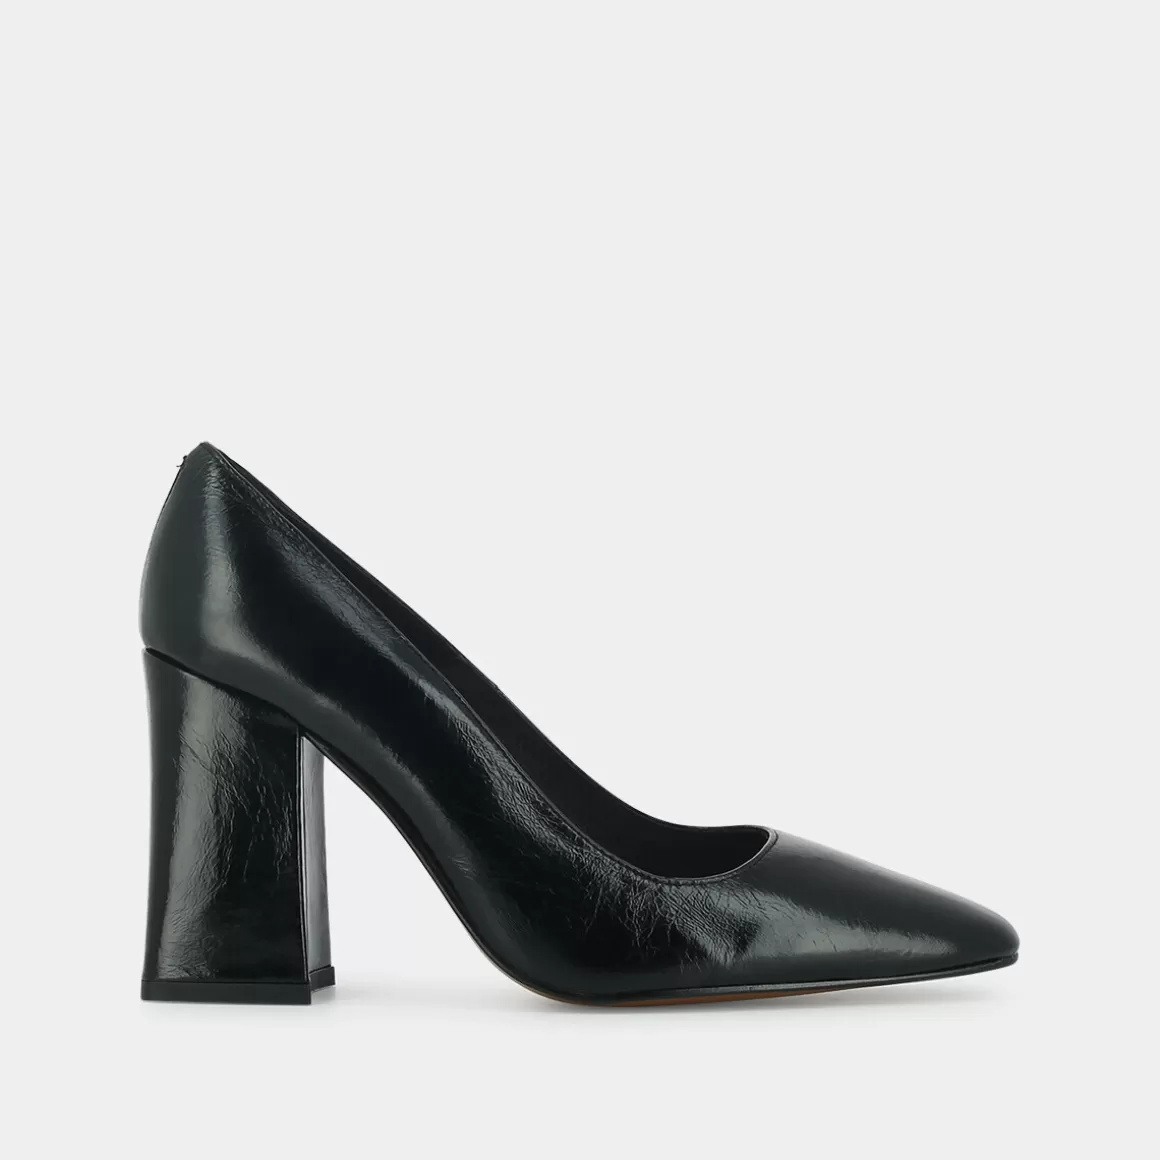 Pumps with heel and square toe<Jonak Best